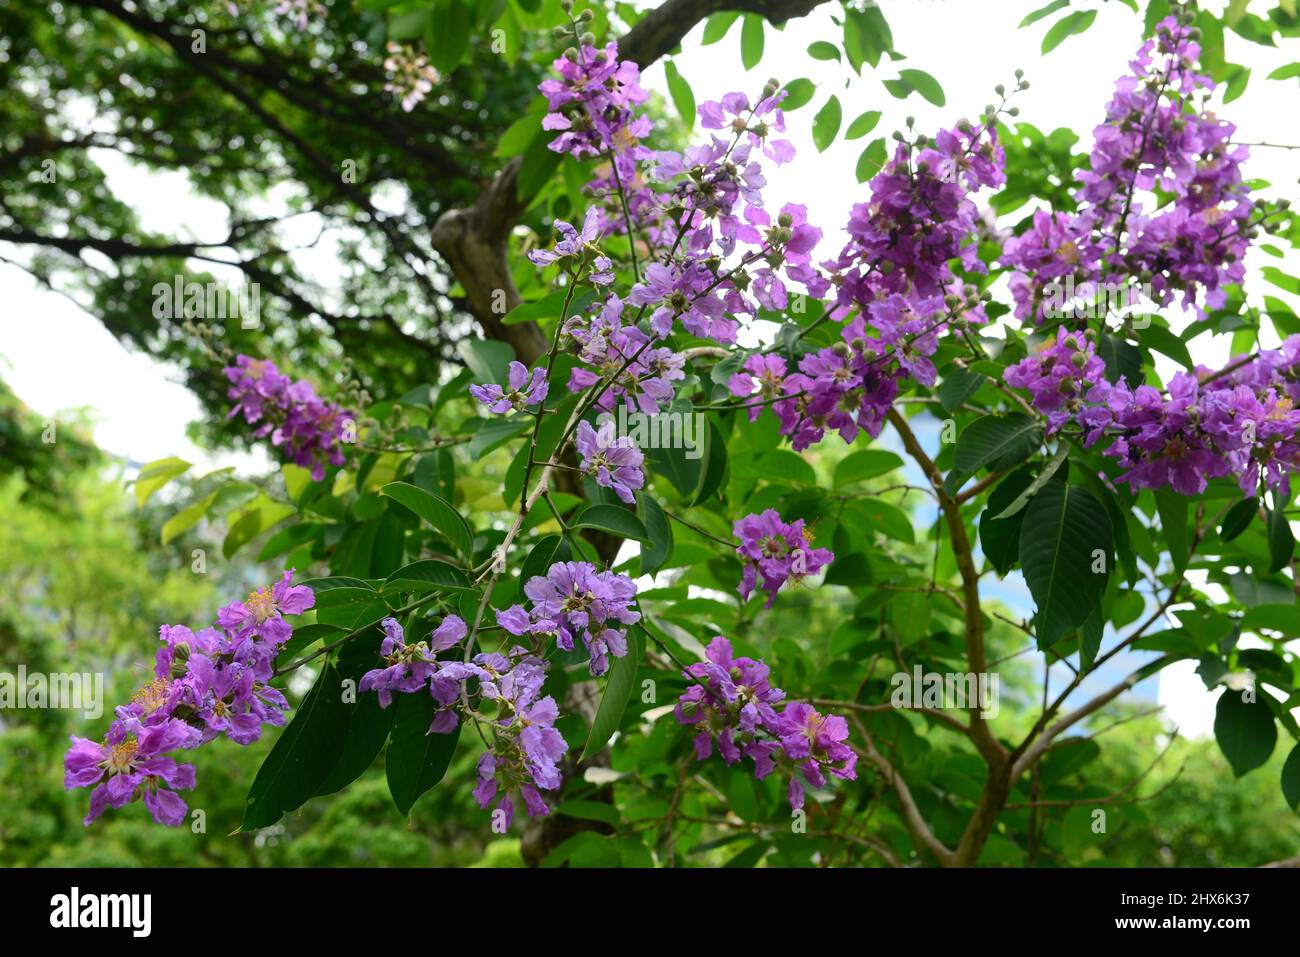 Lagerstroemia native to tropical southern Asia. It is a deciduous tree with bright pink to light purple flowers. Stock Photo